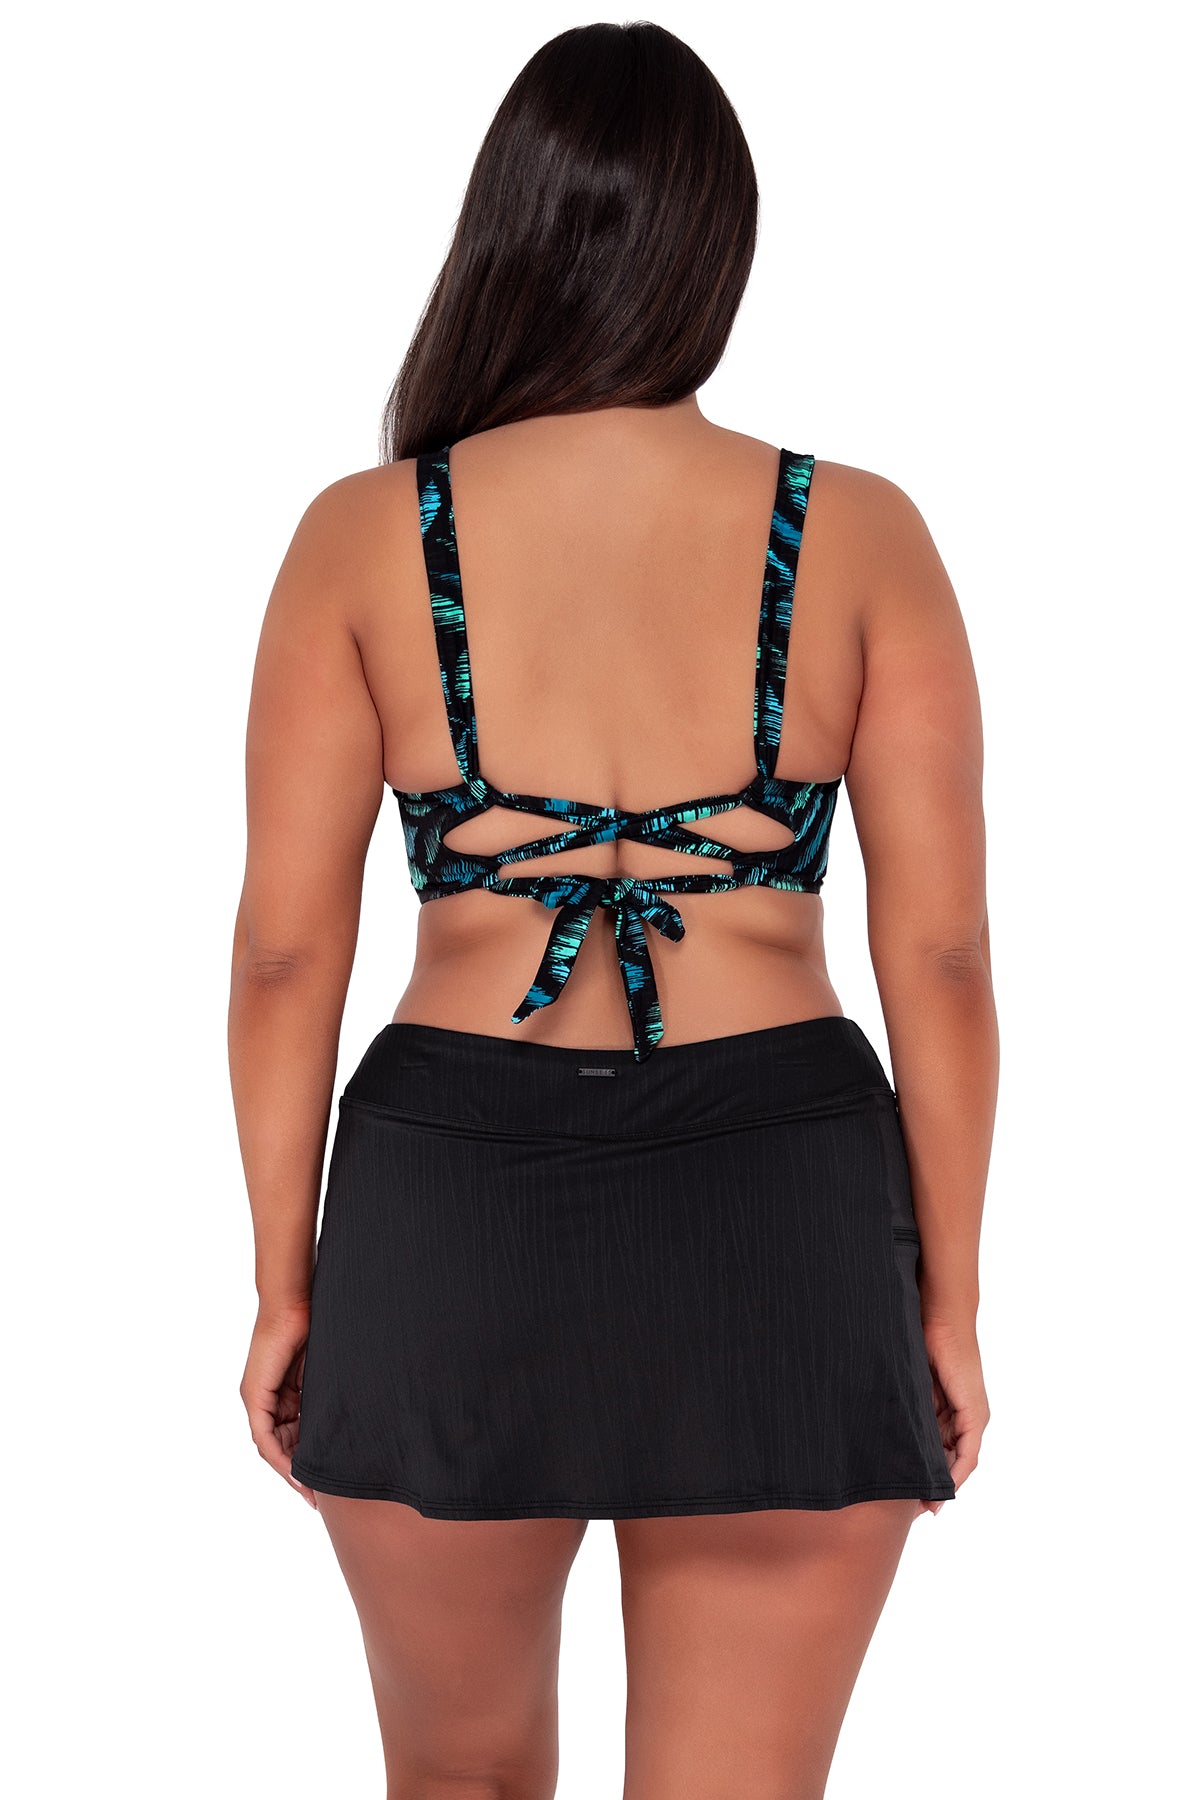 Back pose #1 of Nicki wearing Sunsets Cascade Seagrass Texture Elsie Top paired with Sporty Swim Skirt swim bottom